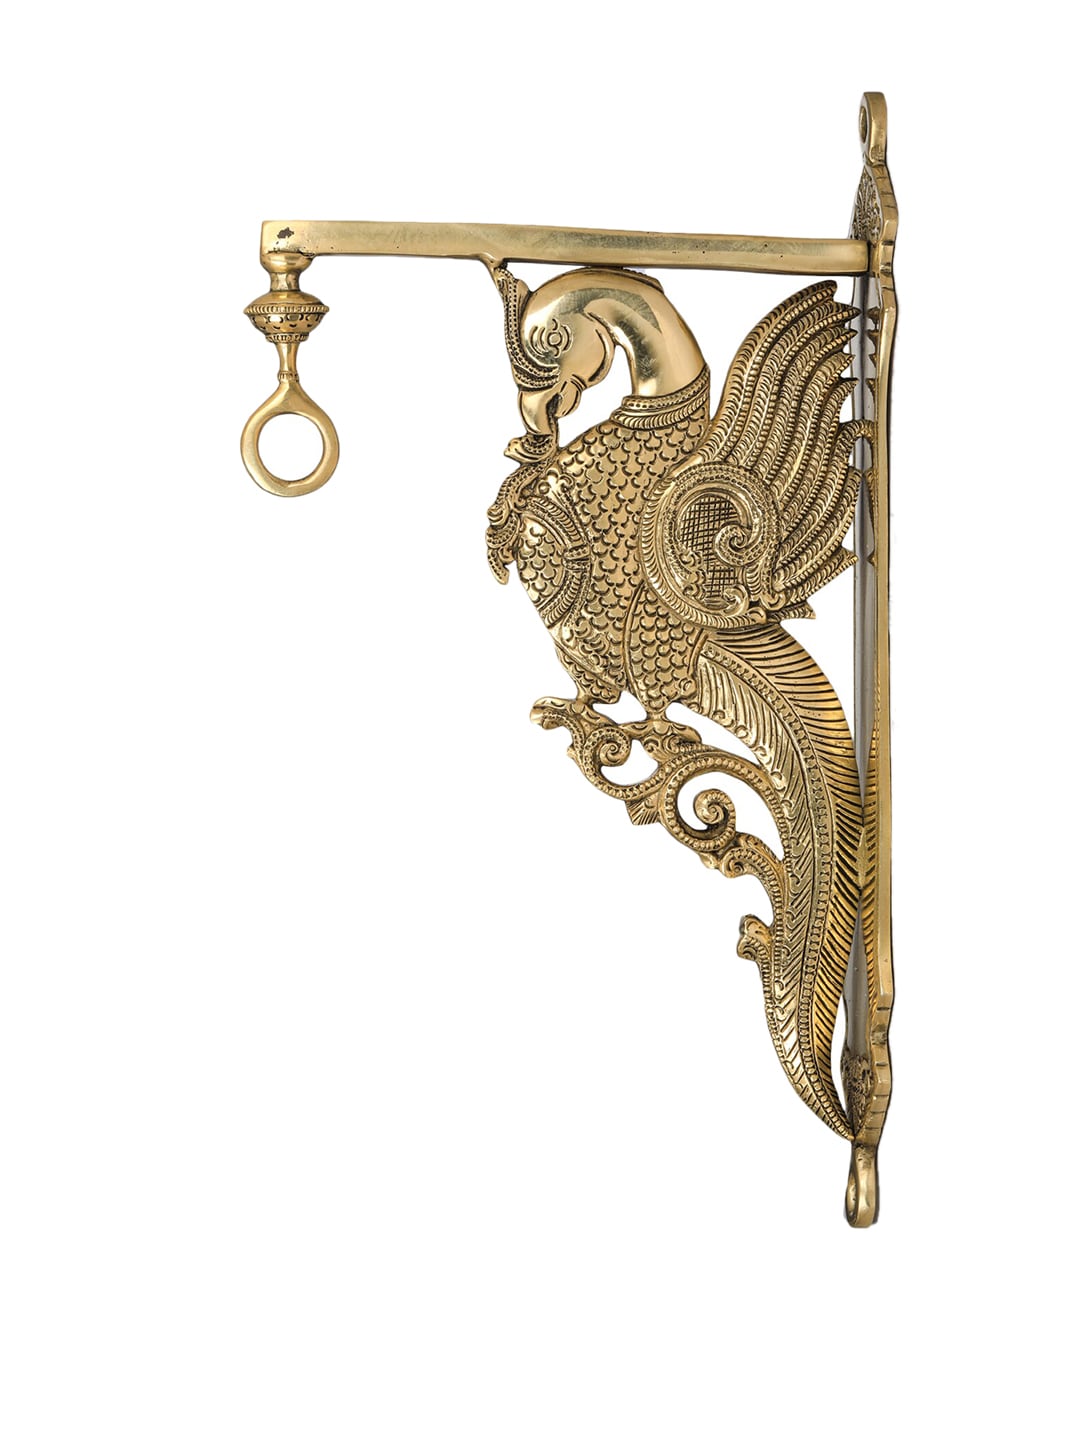 Exotic India Gold-Toned Parrot Bracket Brass Wall Hanging Price in India